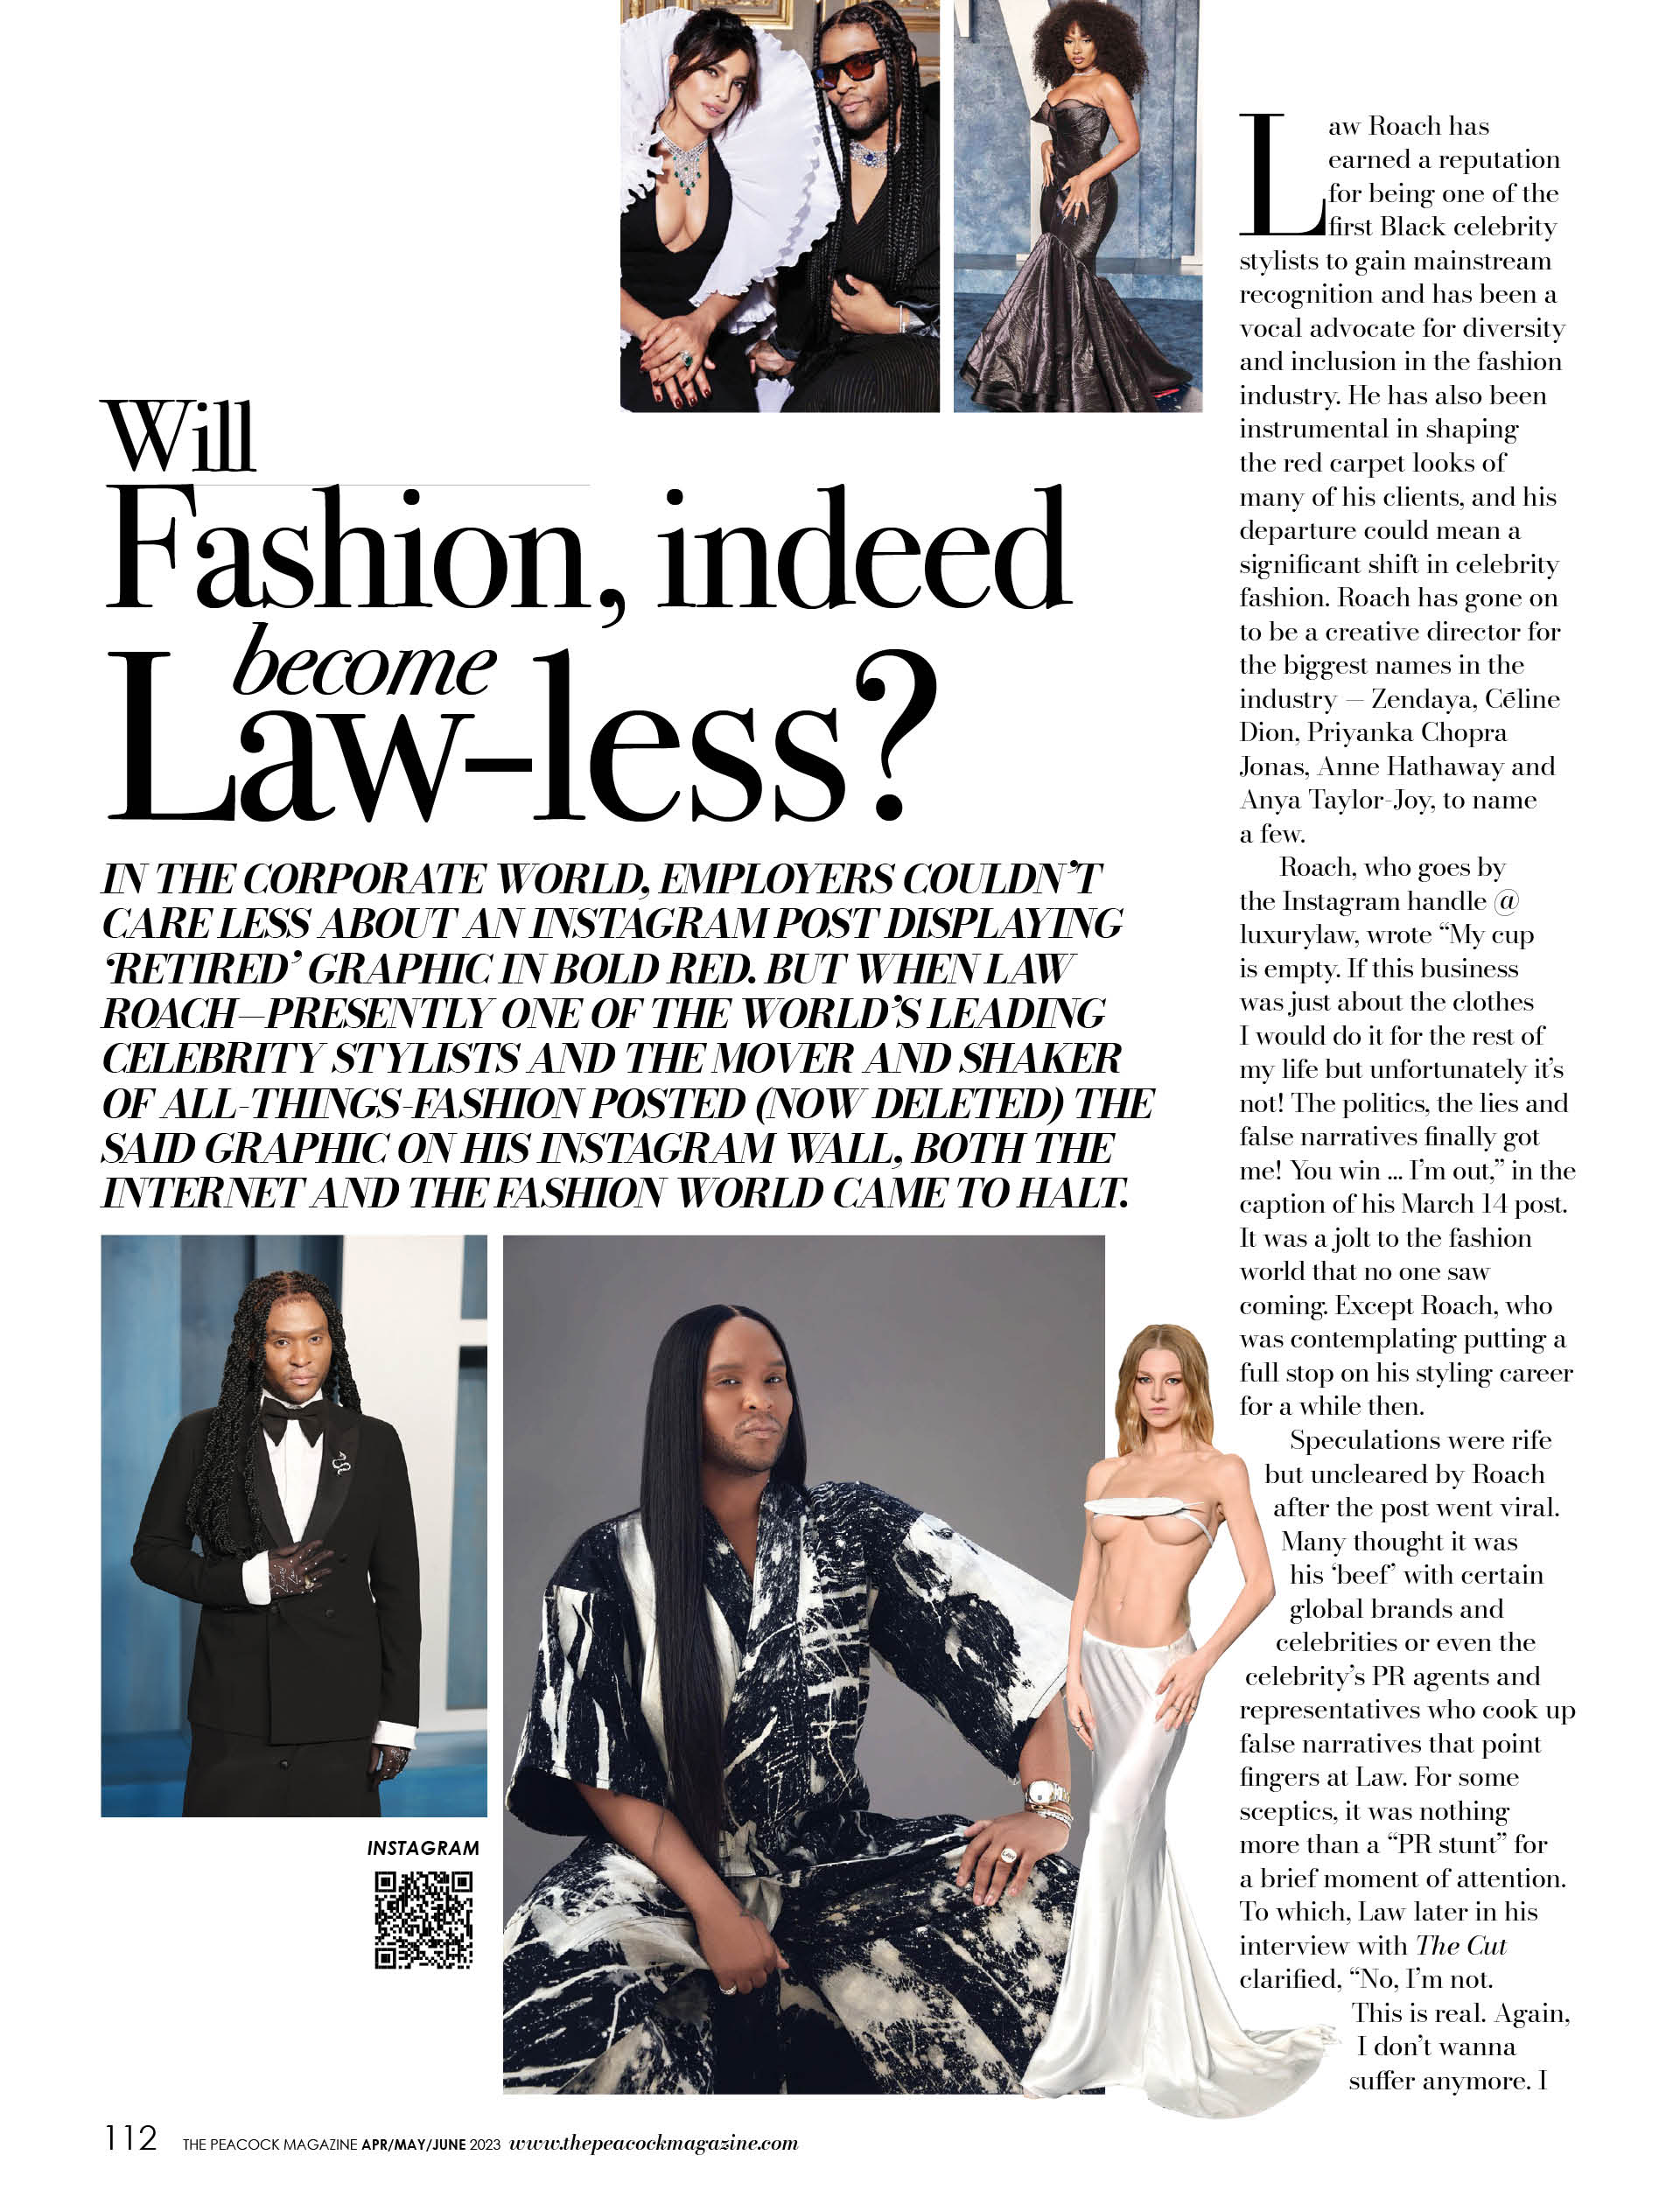 WILL FASHION, INDEED, BECOME LAW-LESS? :- In the corporate world..